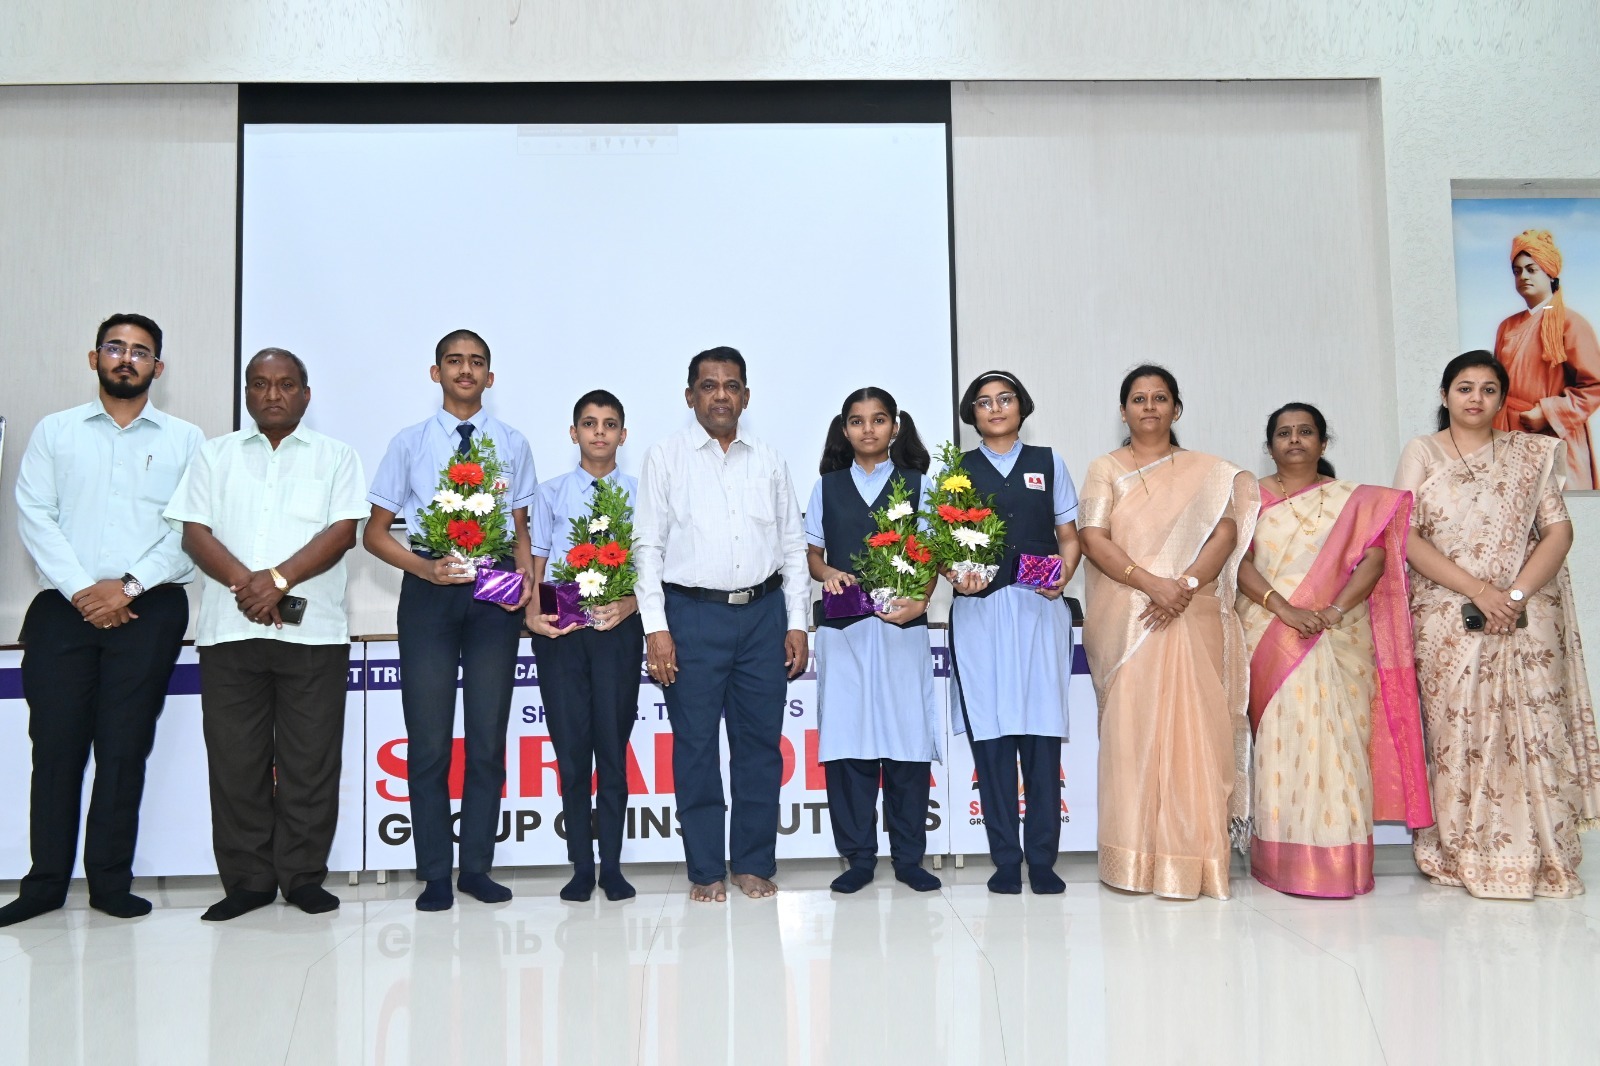 Dr Shraddha Institute students excel in Homi Bhabha pediatric competition